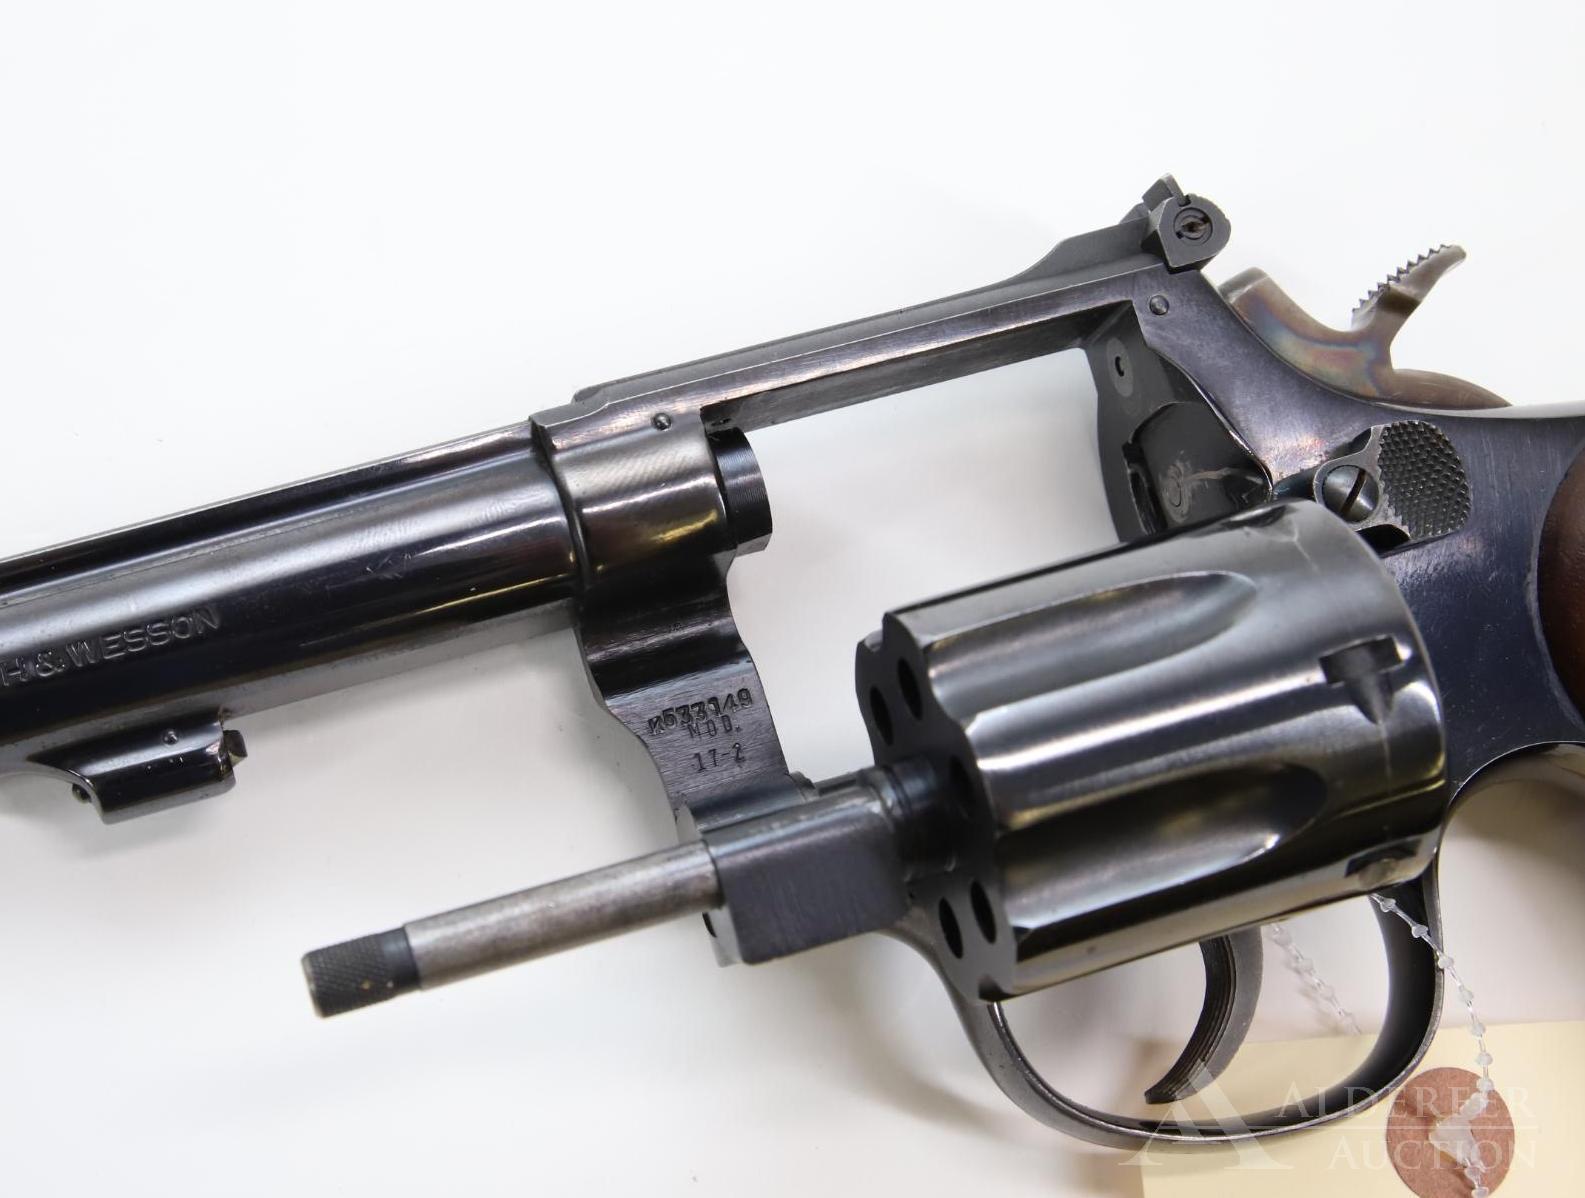 Smith & Wesson 17-2 Double Action Revolver